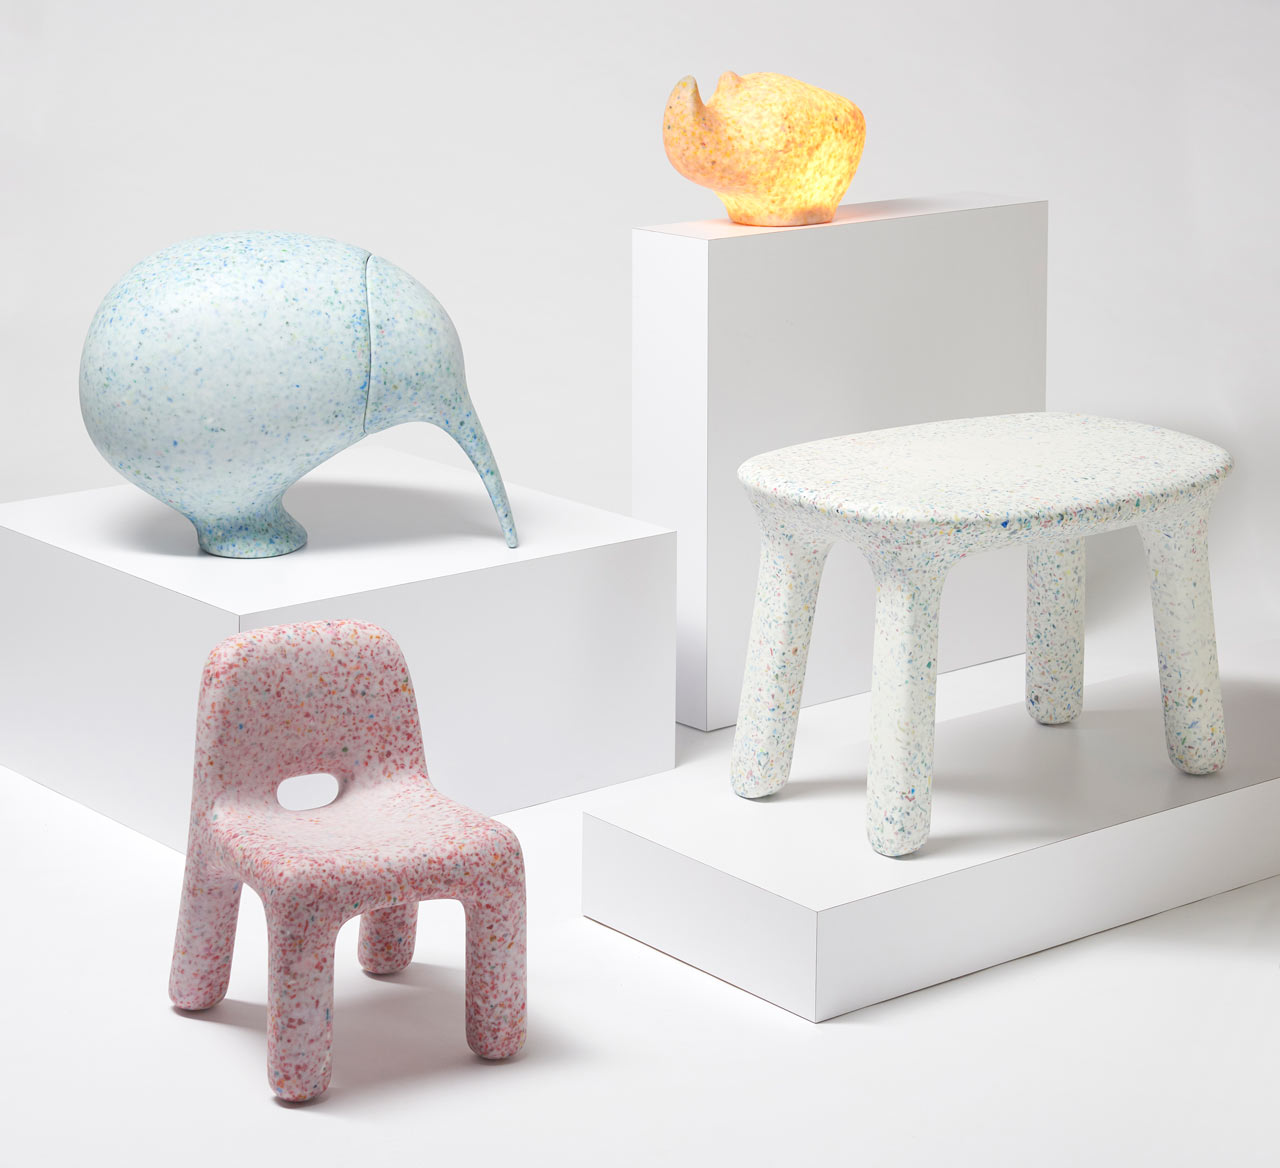 ecoBirdy Creates Kid's Furniture Made From Old Plastic Toys